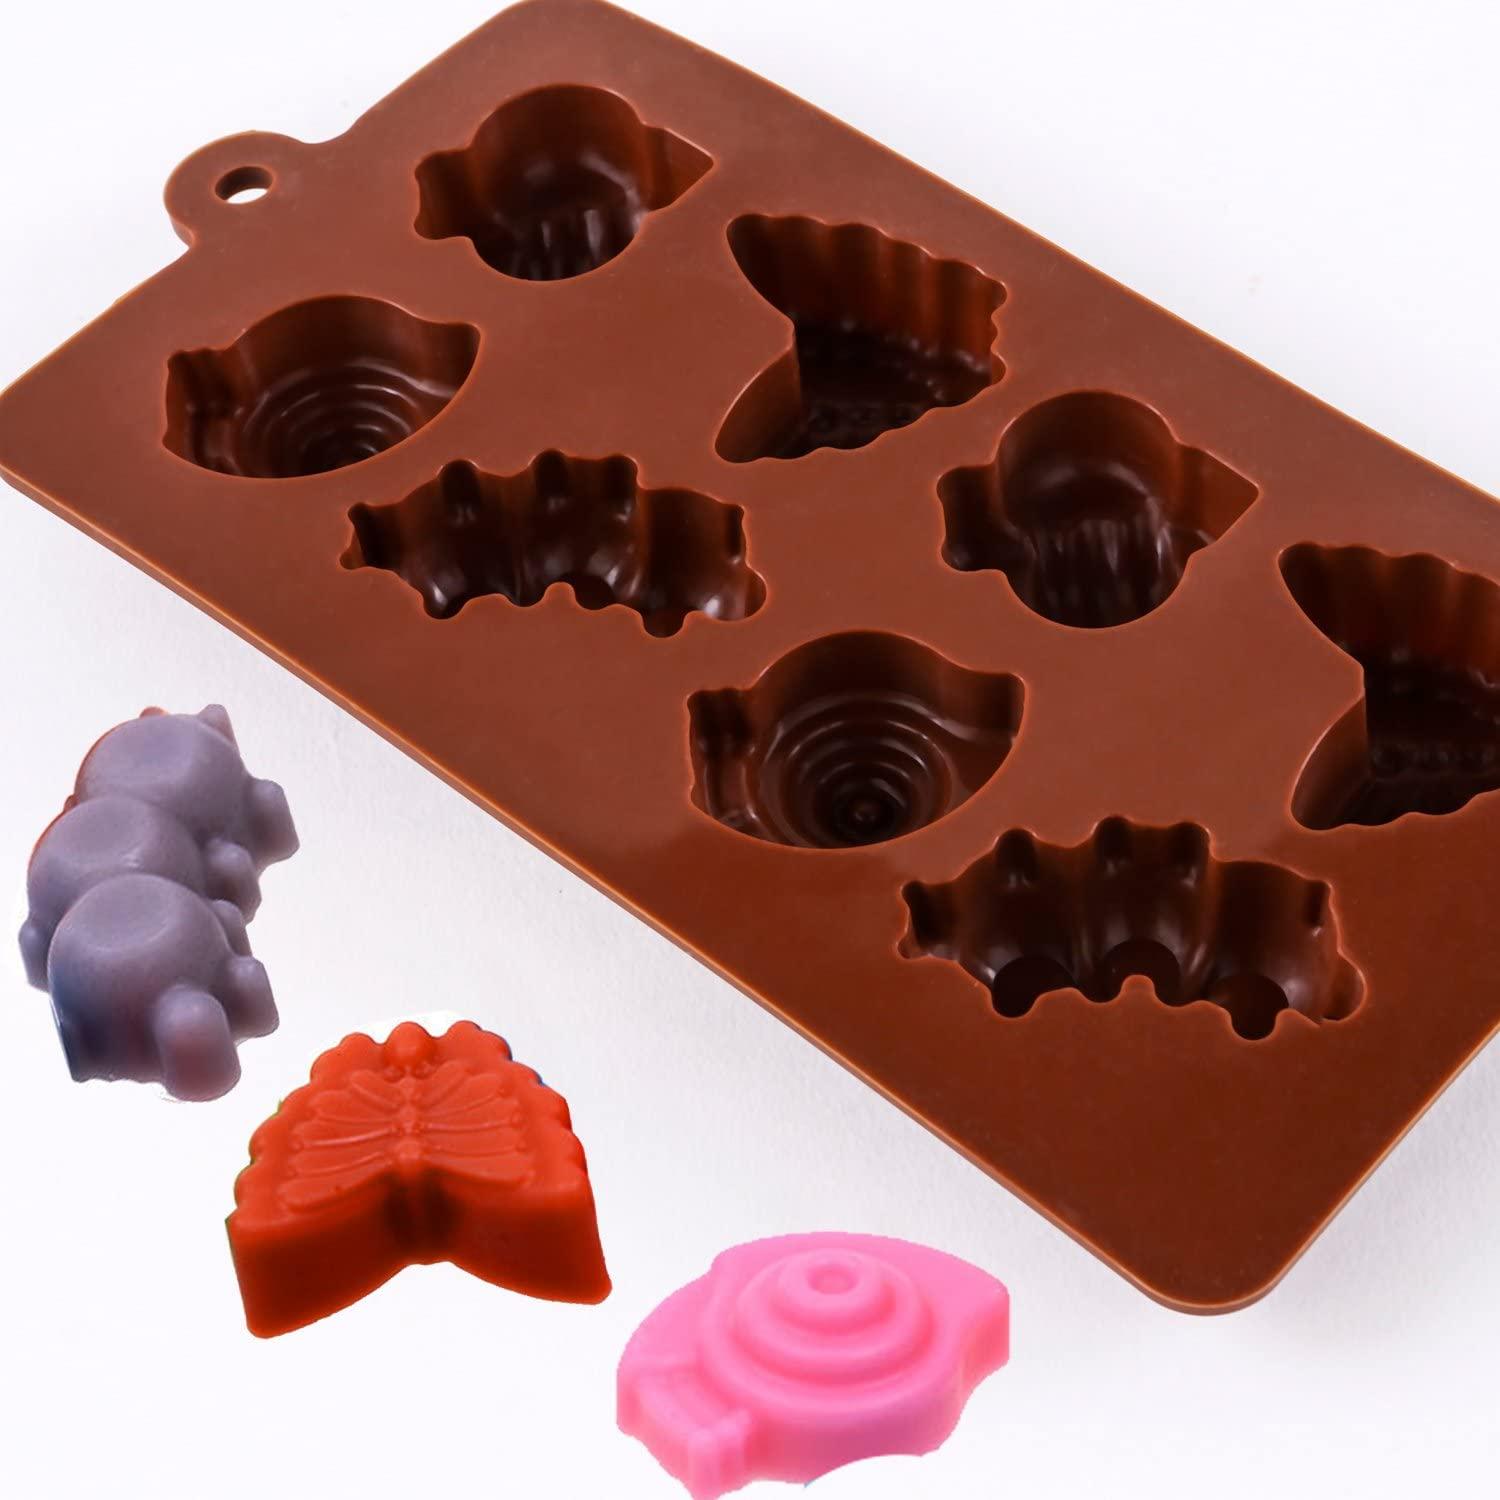 STARUBY Silicone Molds Non-stick Chocolate Candy Mold,Soap Molds,Silicone  Baking mold Making Kit, Set of 3 Forest Theme with Different Shapes  Animals,Lovely & Fun for Kids